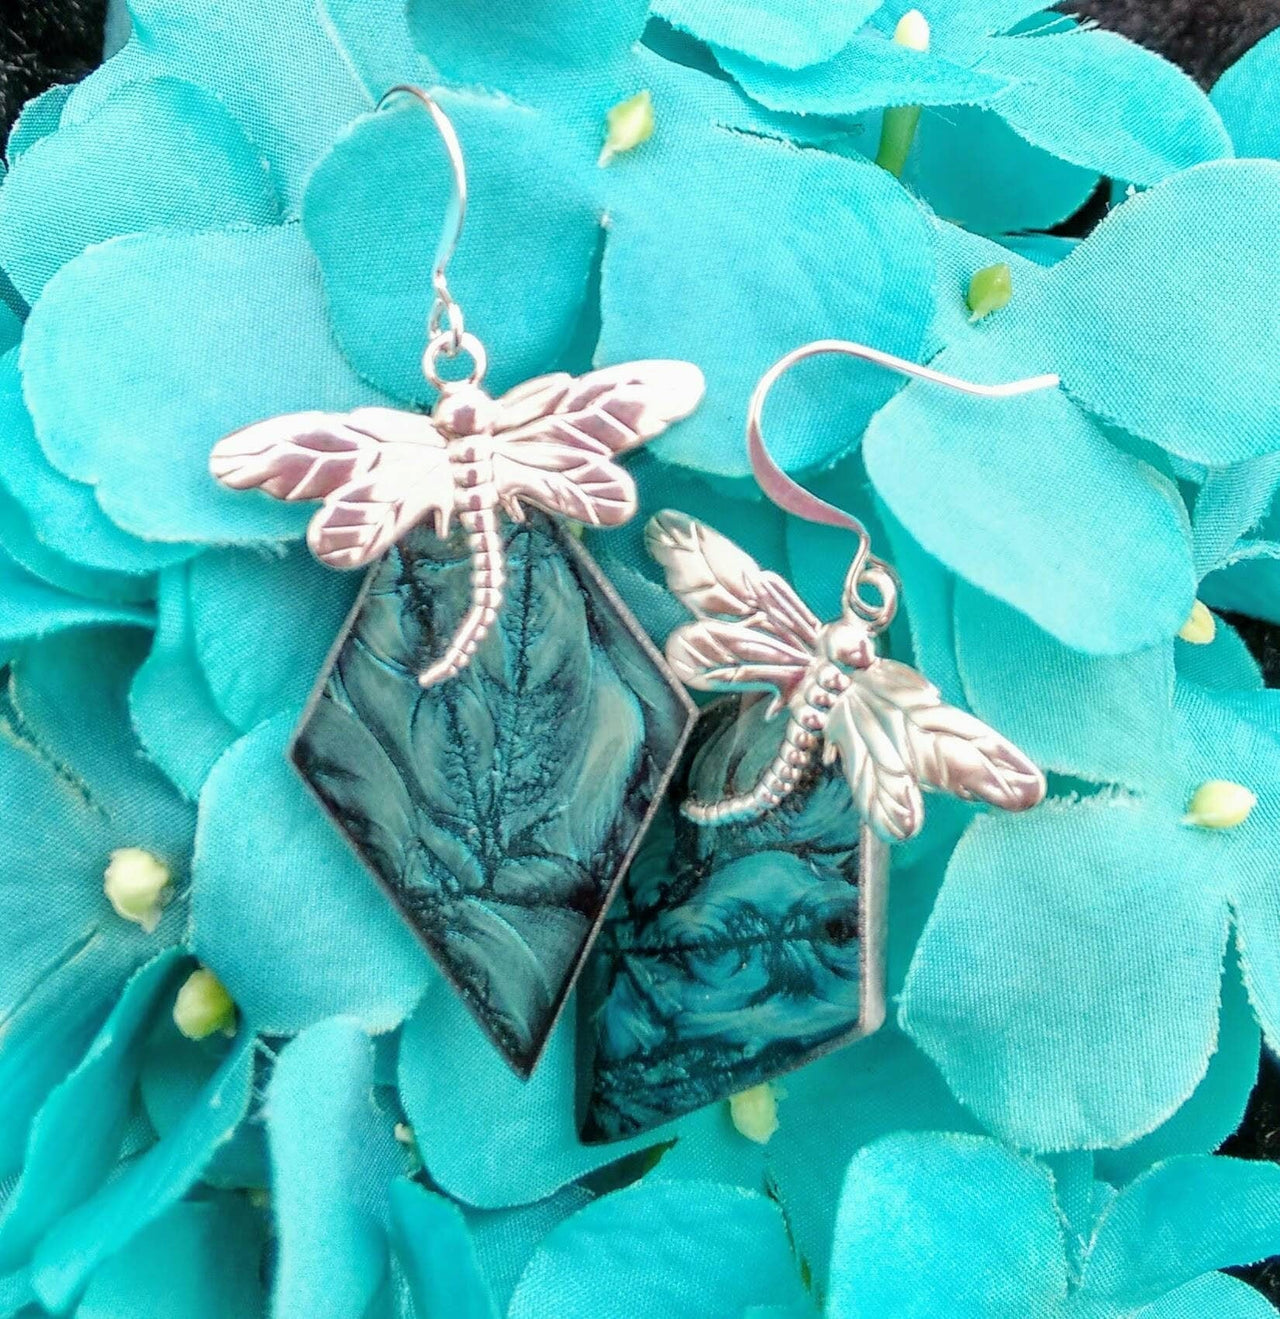 Dragonfly turquoise Van Gogh stained glass earrings